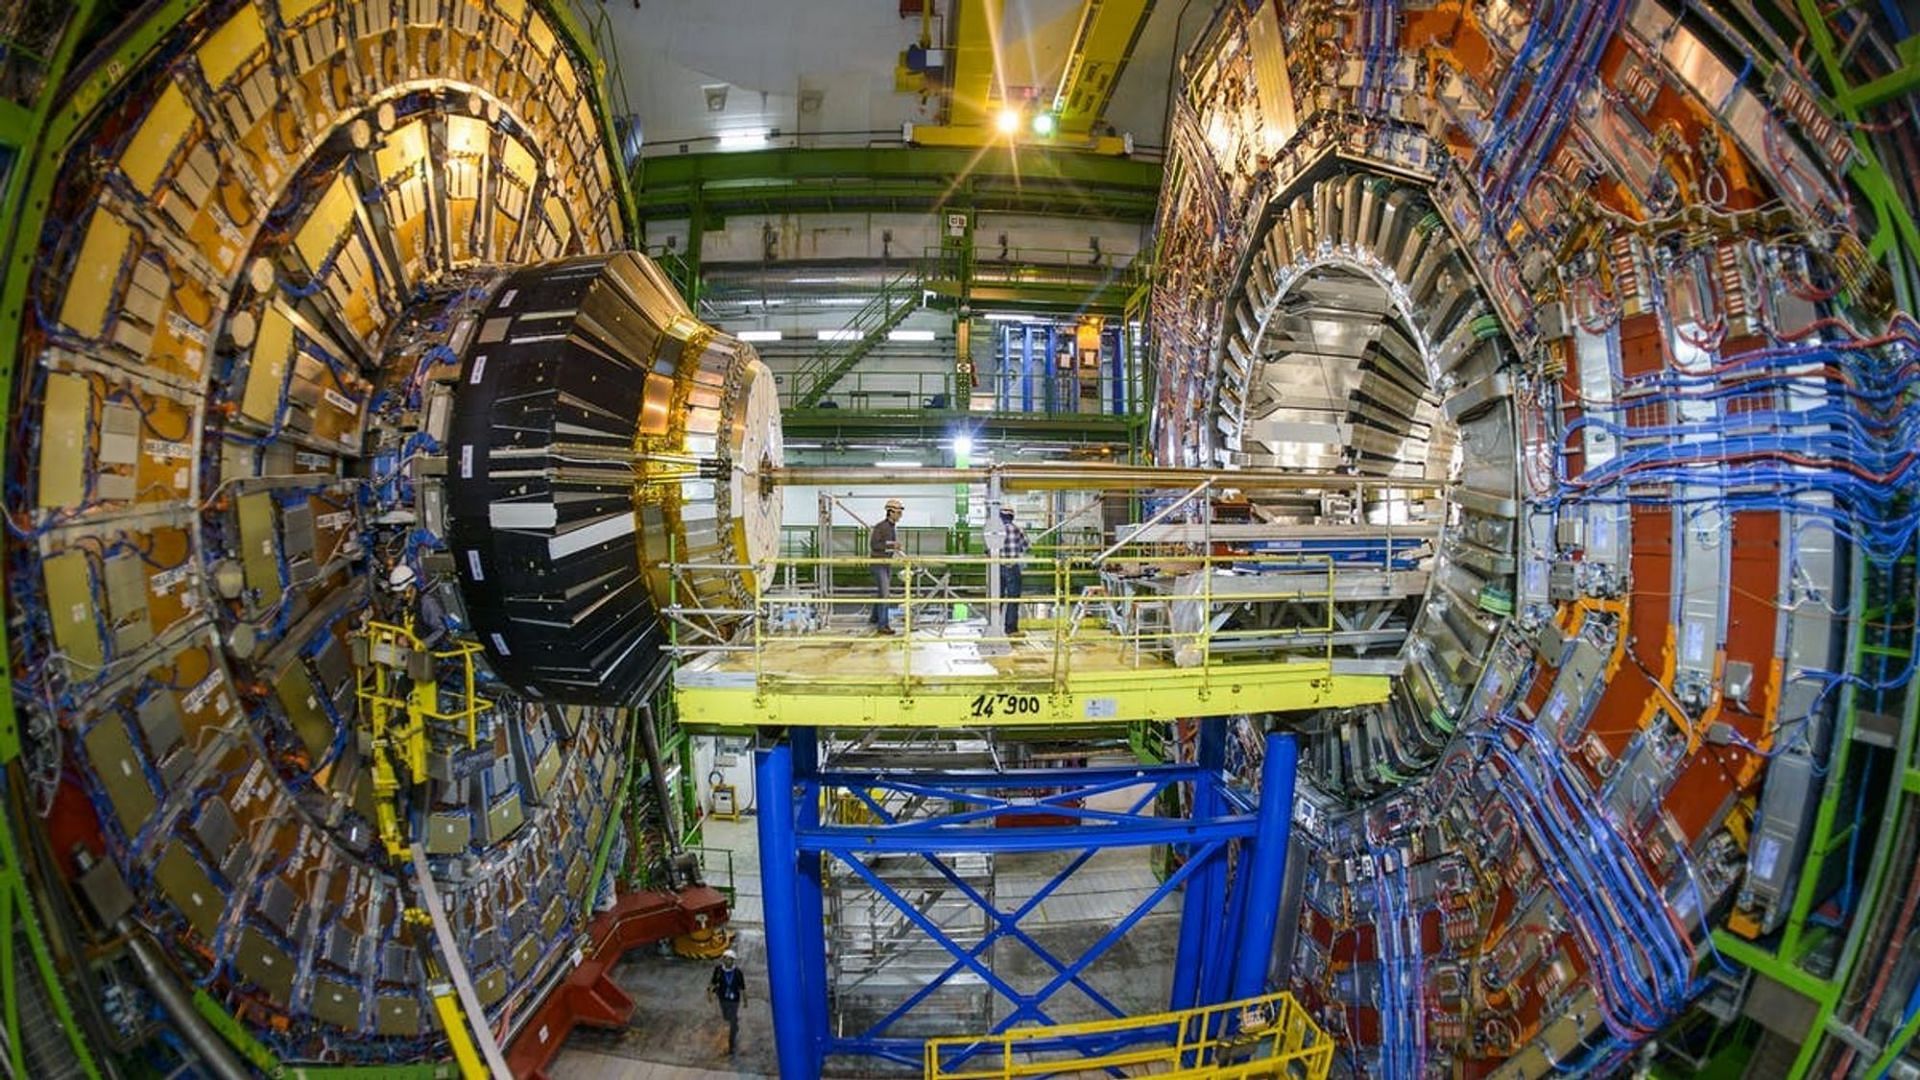 CERN to start the LHC particle accelerator on July 5 (Image via CERN)